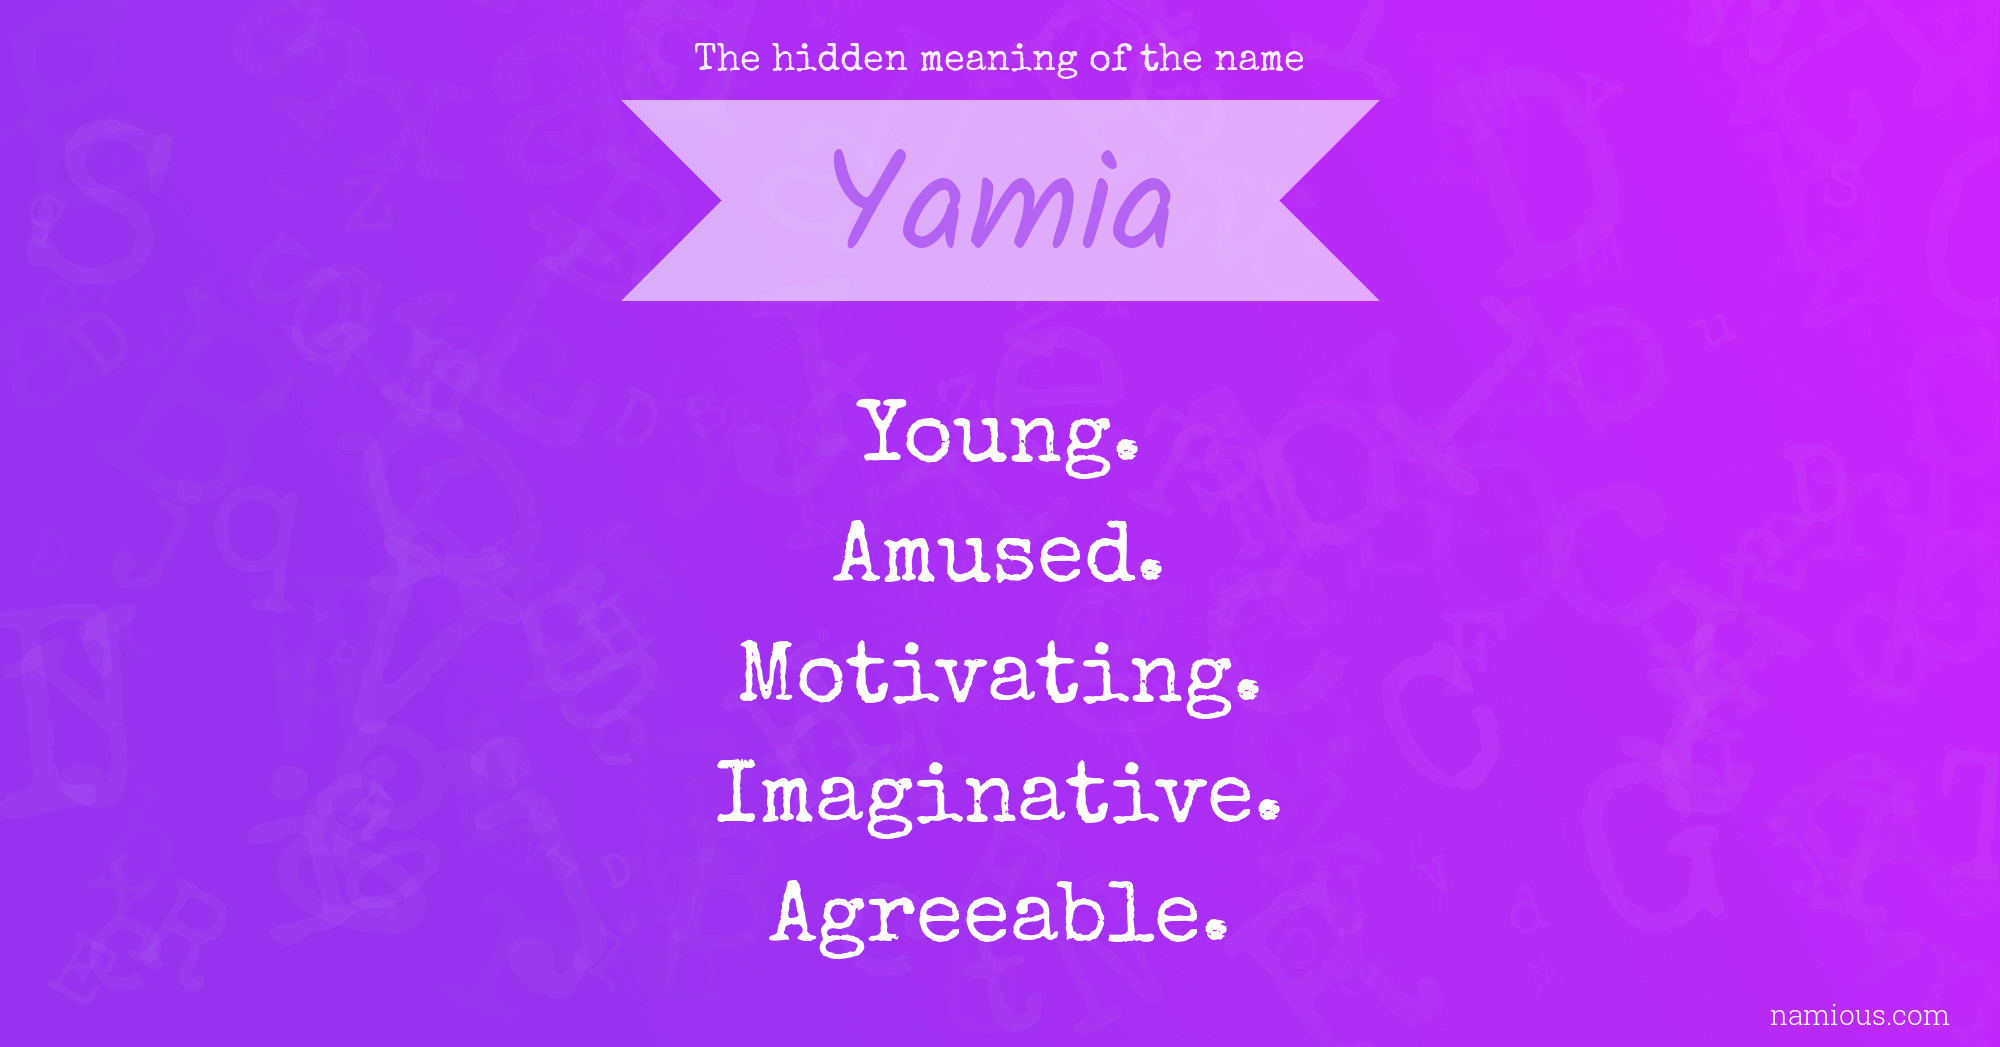 The hidden meaning of the name Yamia